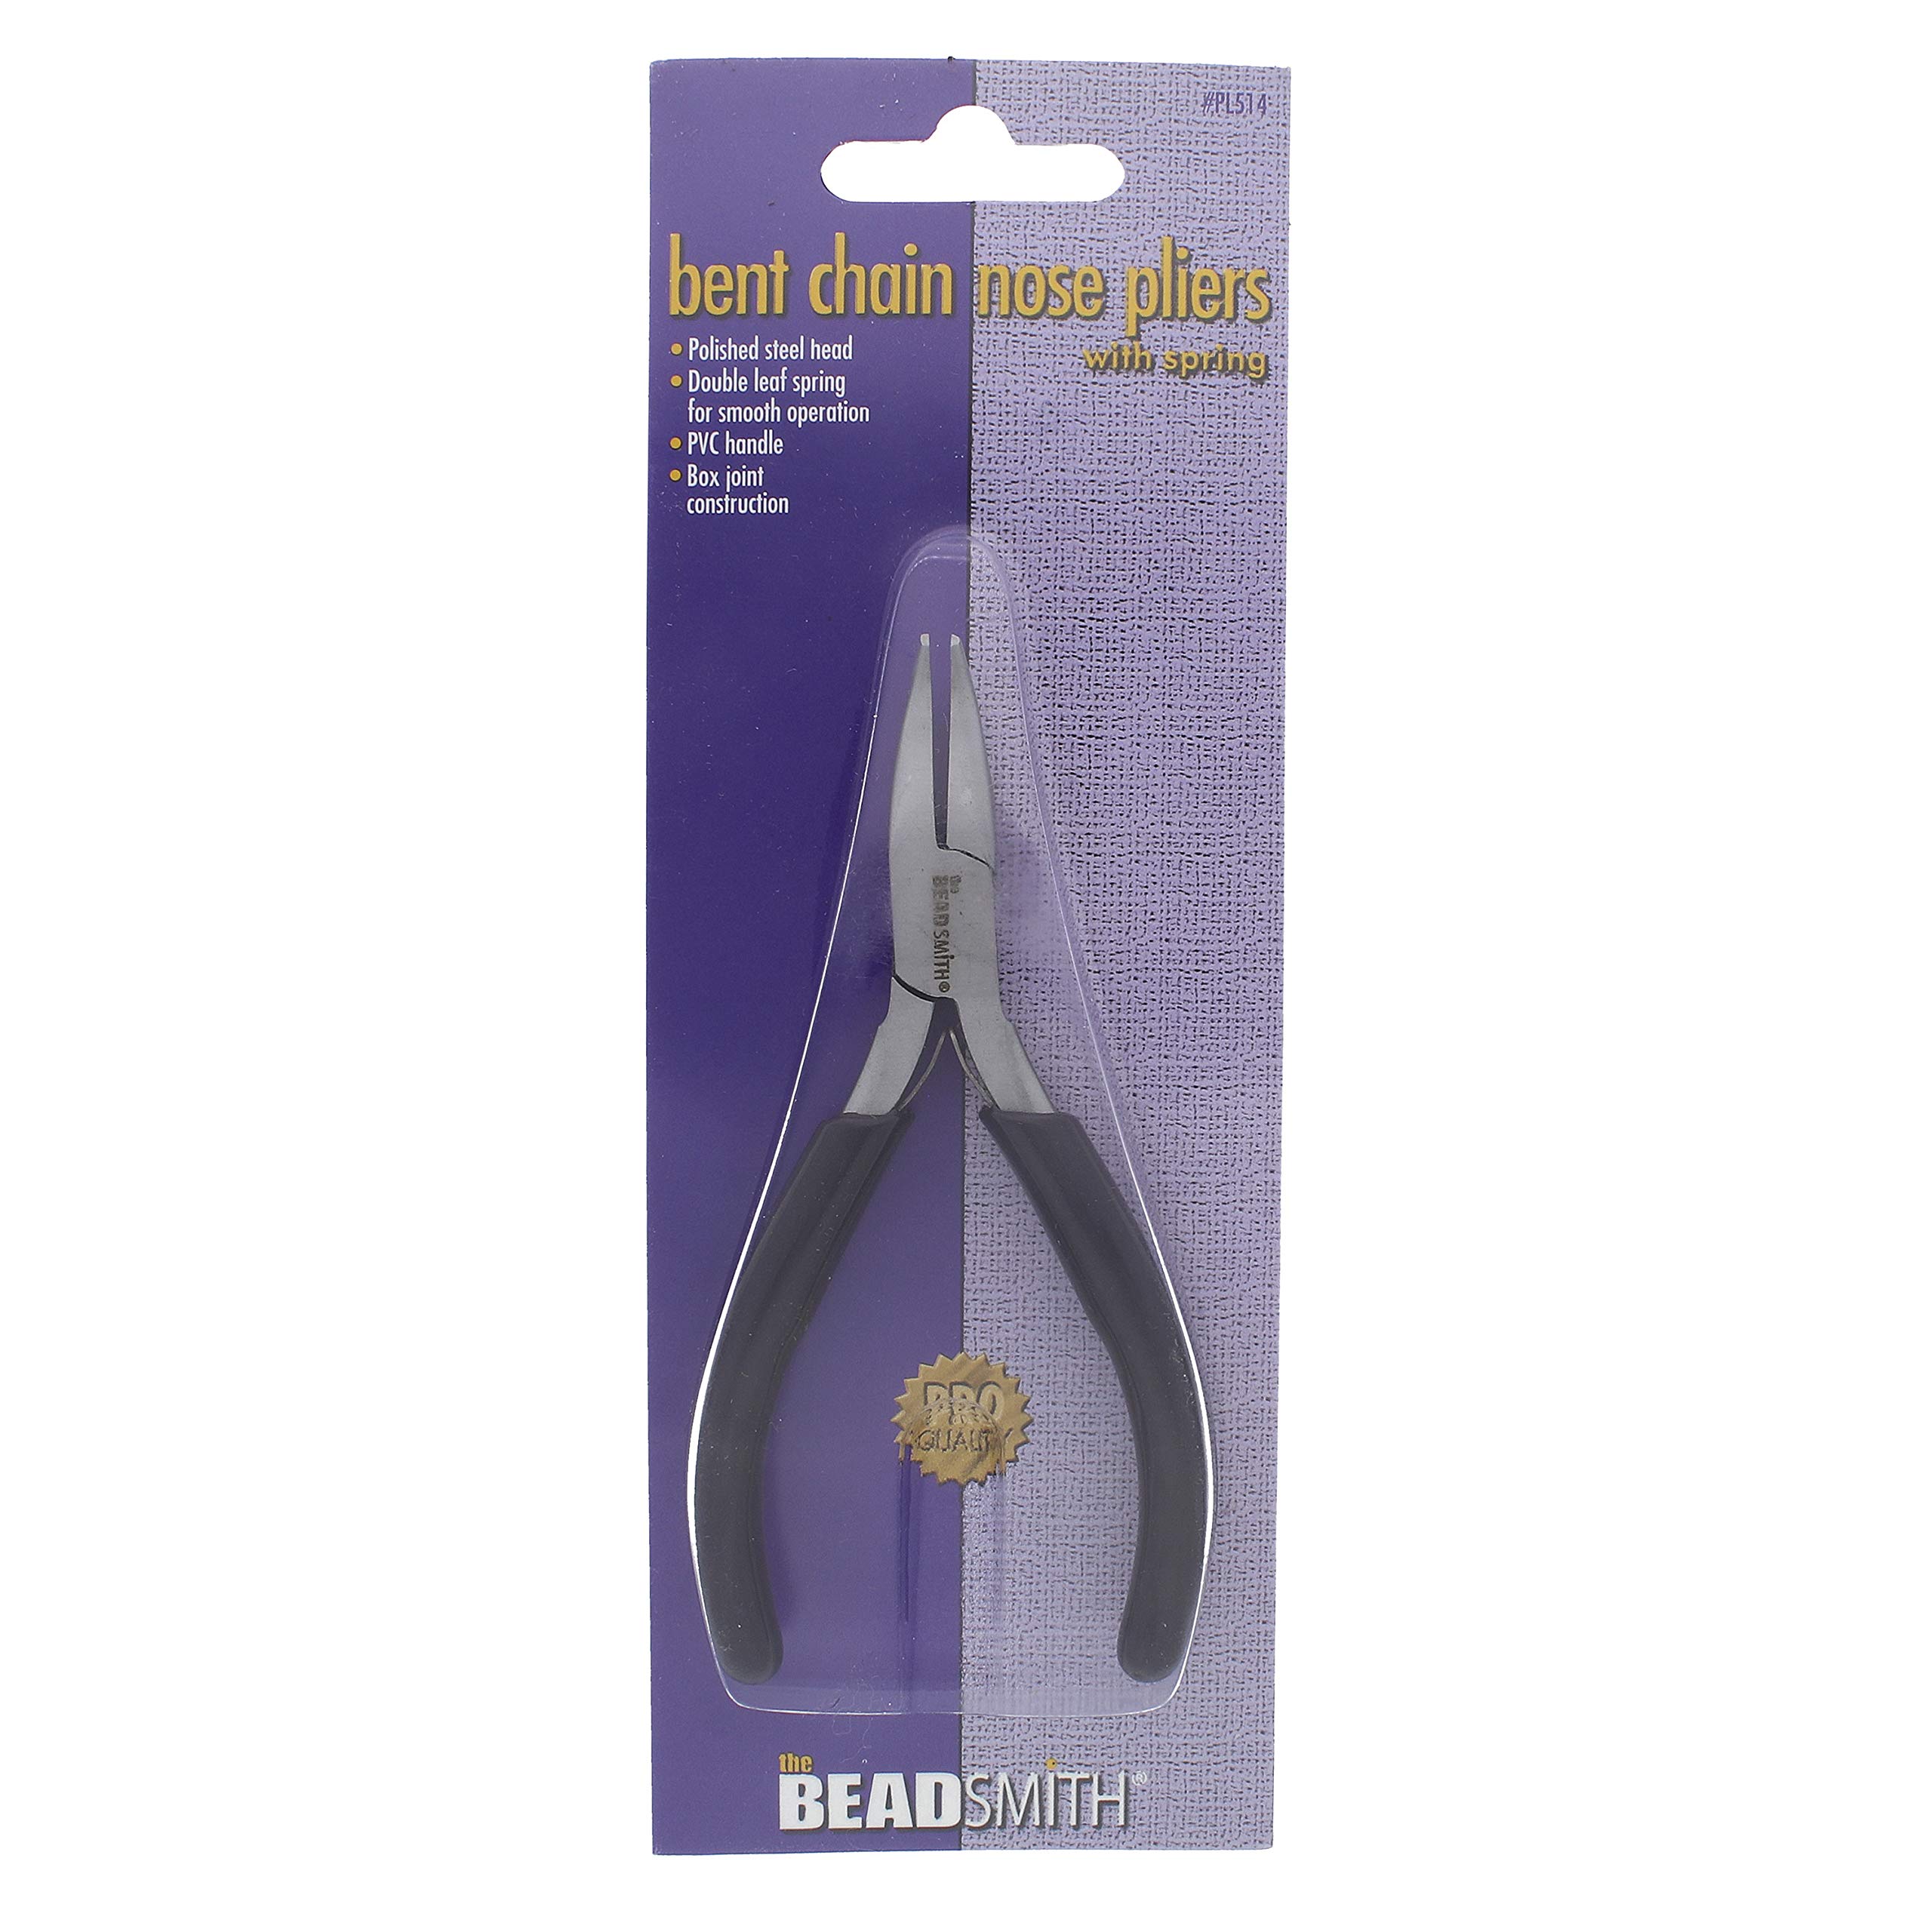 The Beadsmith Bent Chain-Nose Pliers for Crafting and Repair, Jewelry Making Supplies